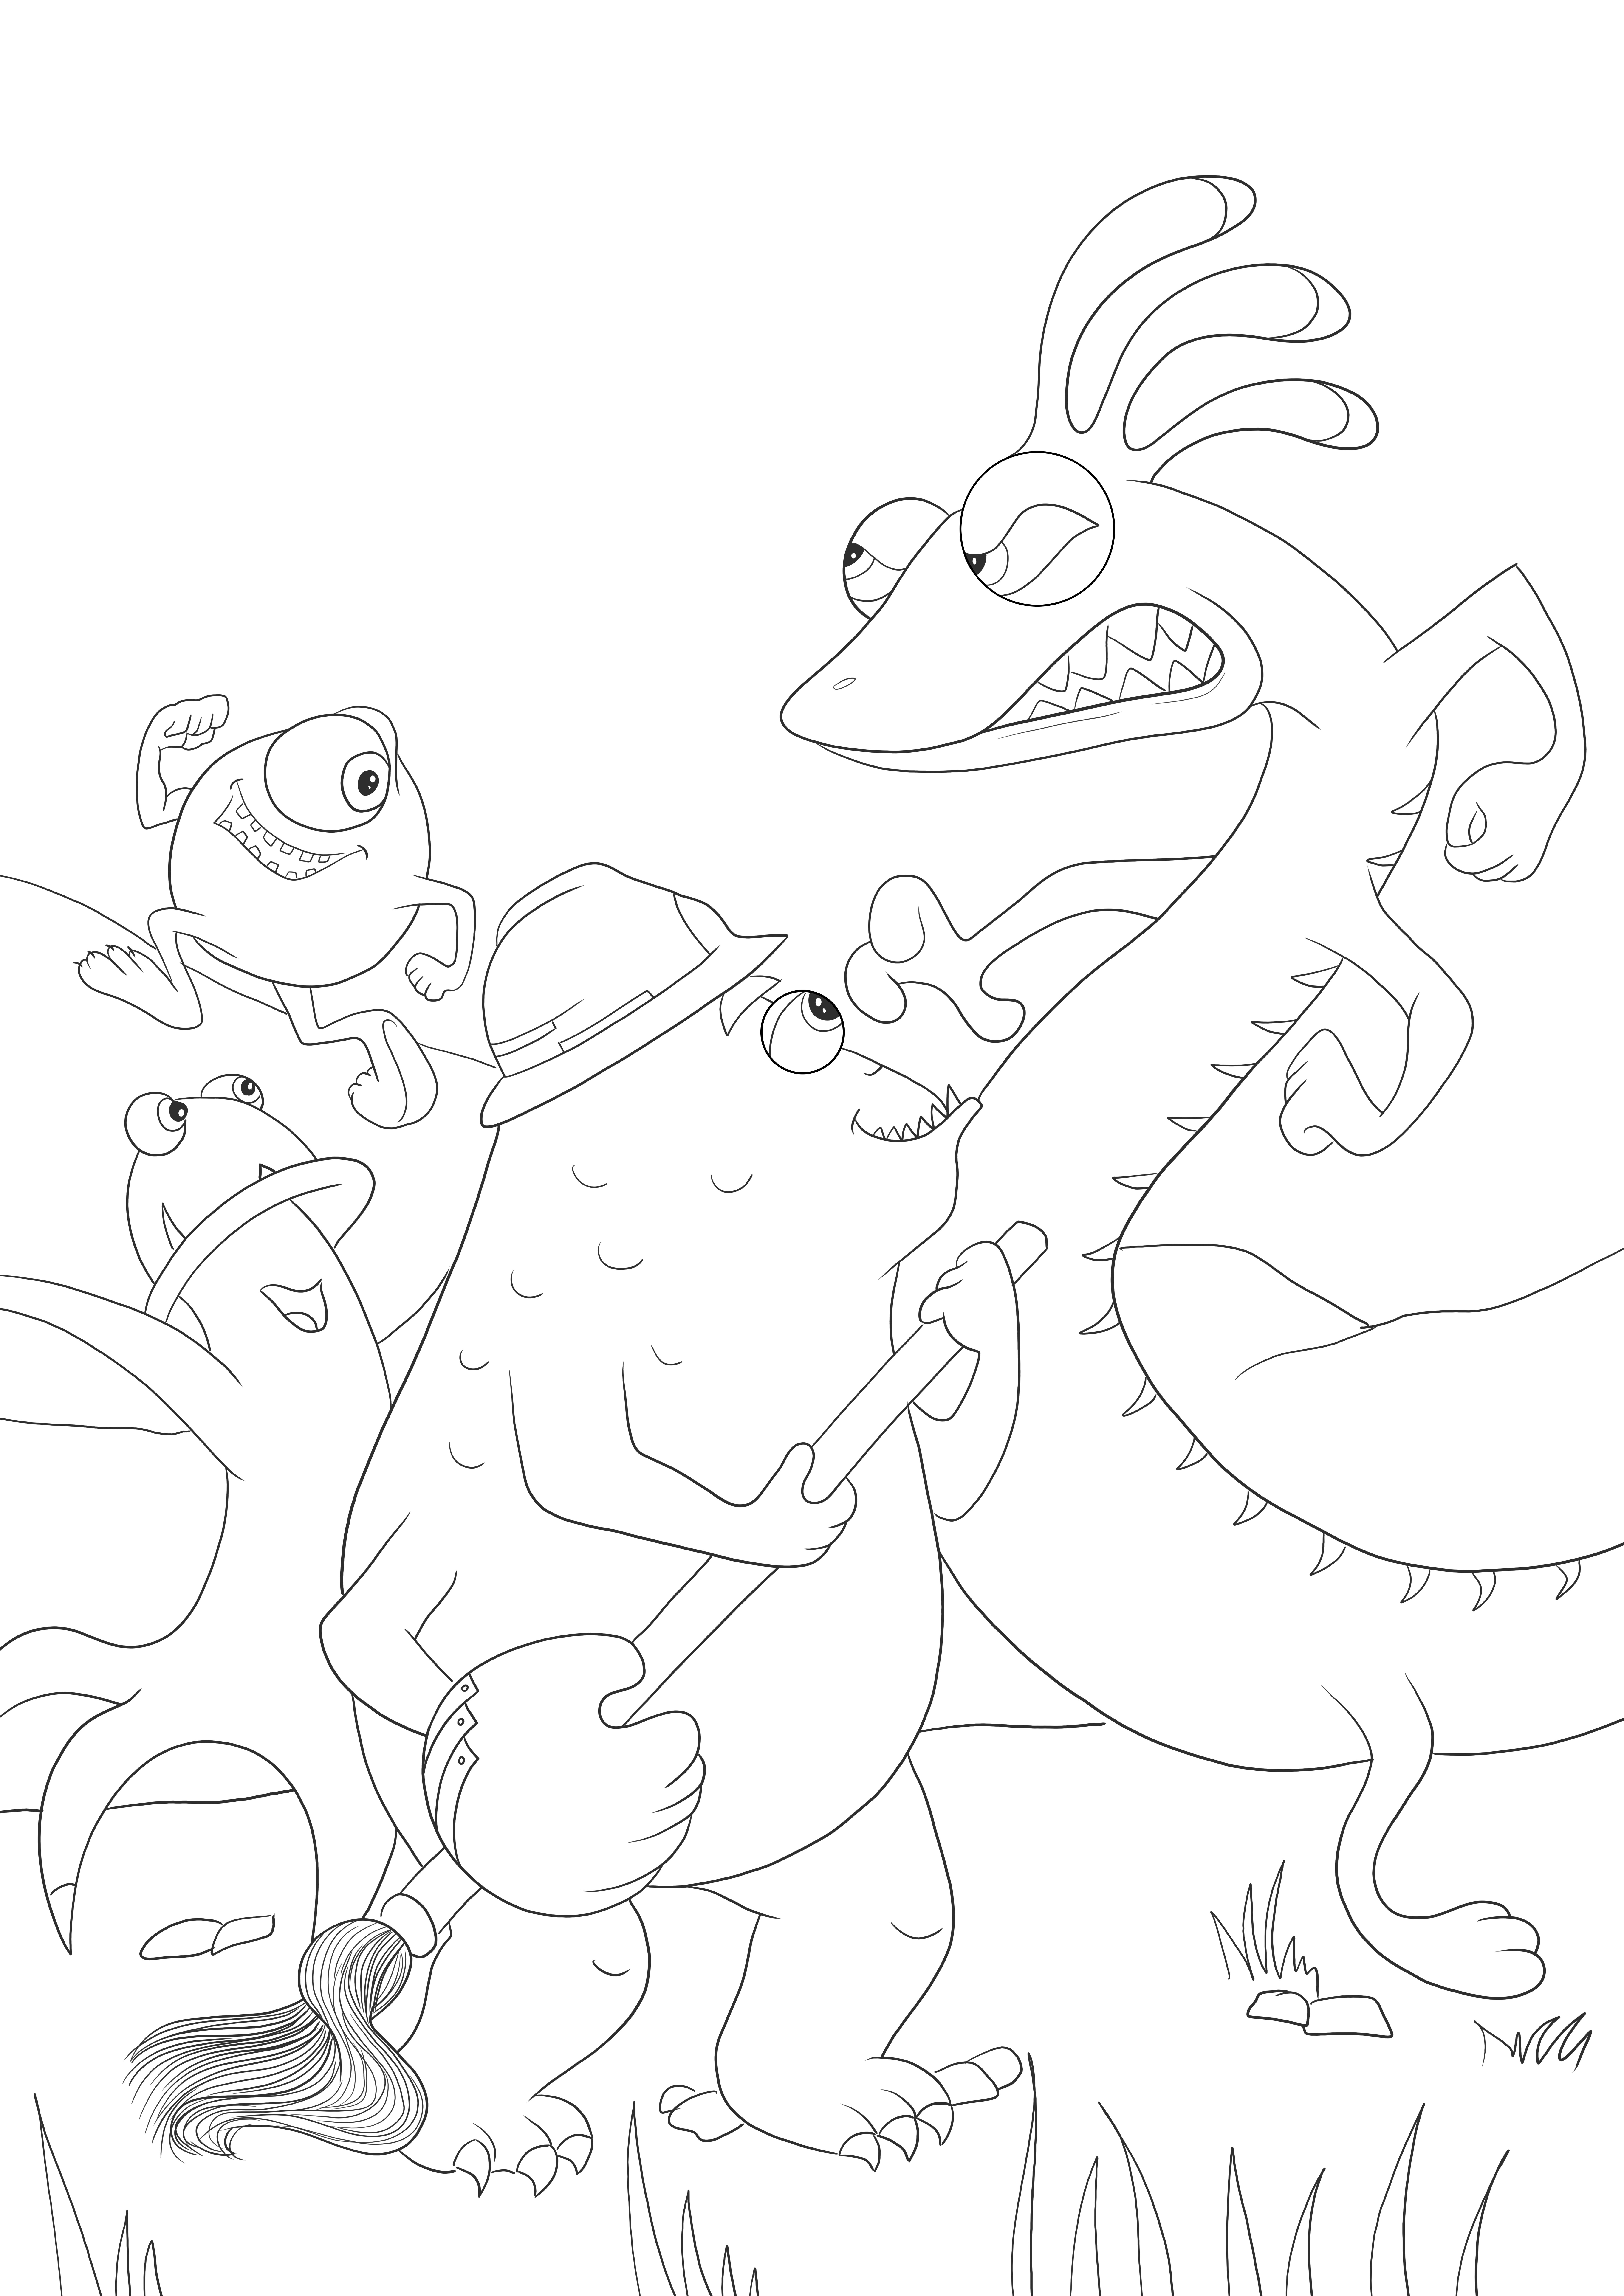 The Monster family coloring sheet for kids to print free